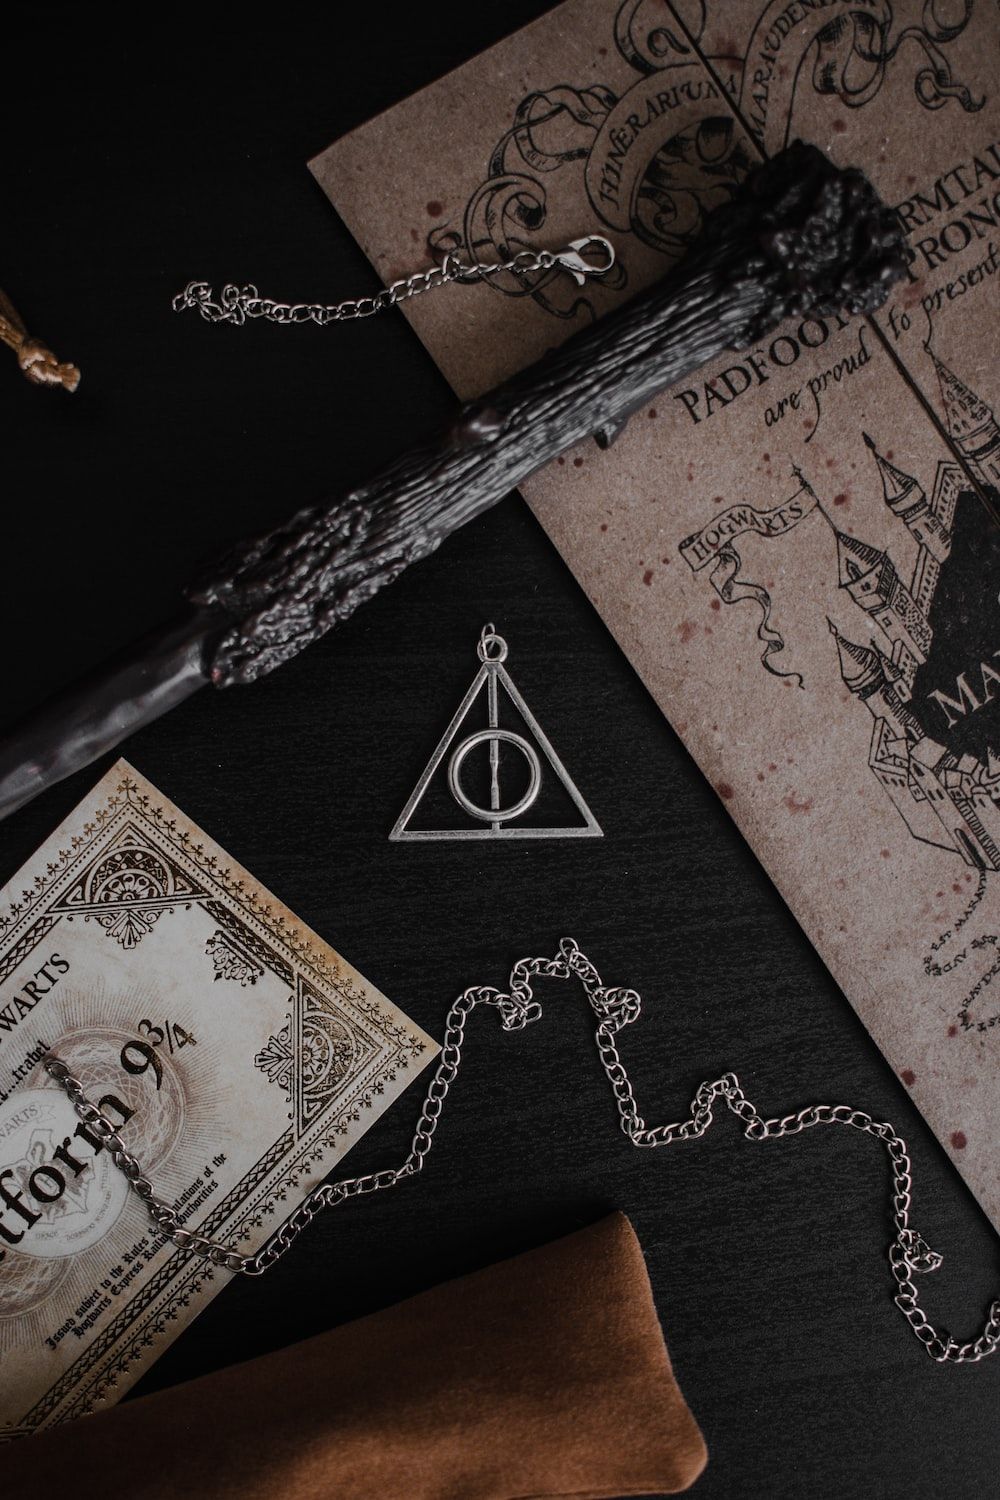 Harry Potter necklace with the deathly hallows symbol - Harry Potter